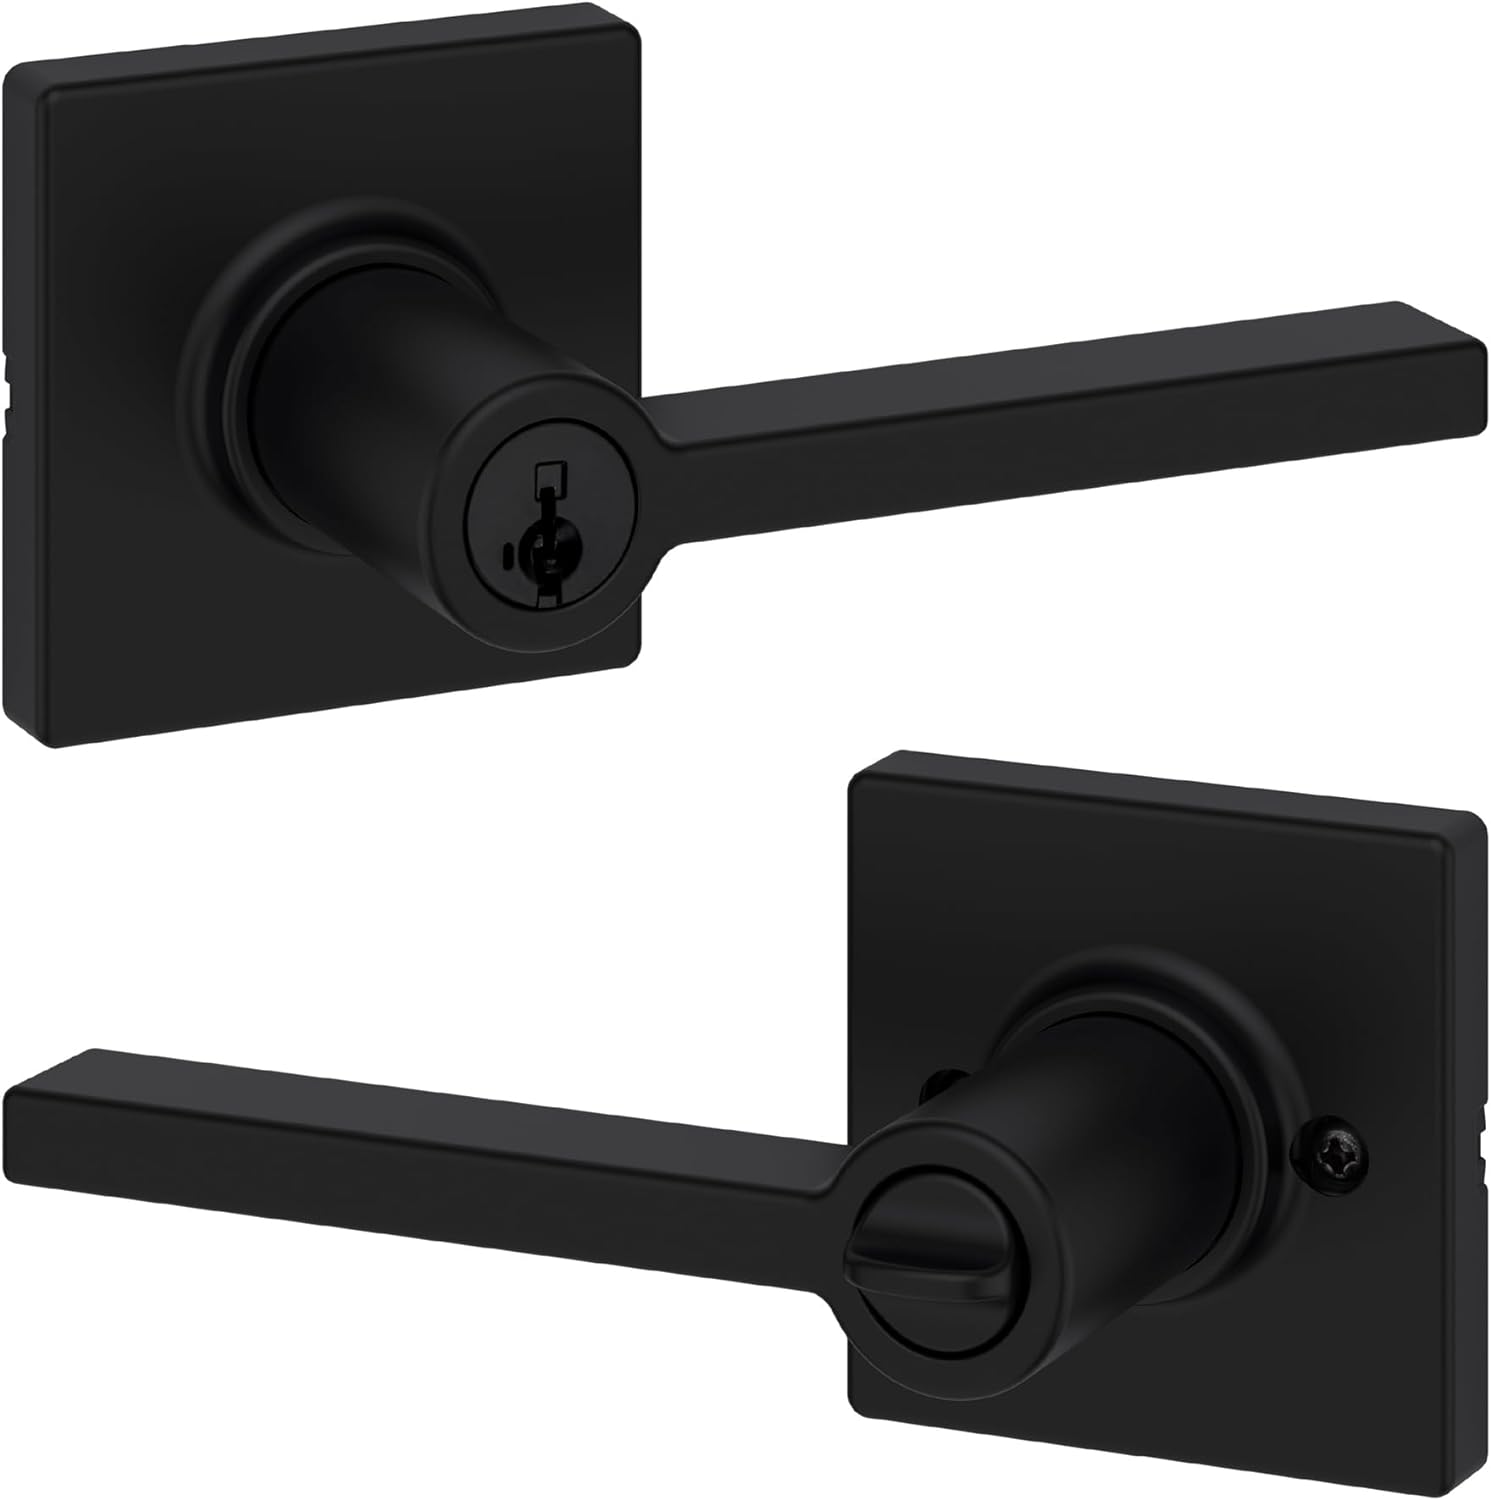 Kwikset Casey Entry Door Handle with Lock and Key, Secure Keyed Reversible Lever Exterior, For Front Entrance and Bedrooms, Matte Black , Pick Resistant Smartkey Rekey Security and Microban